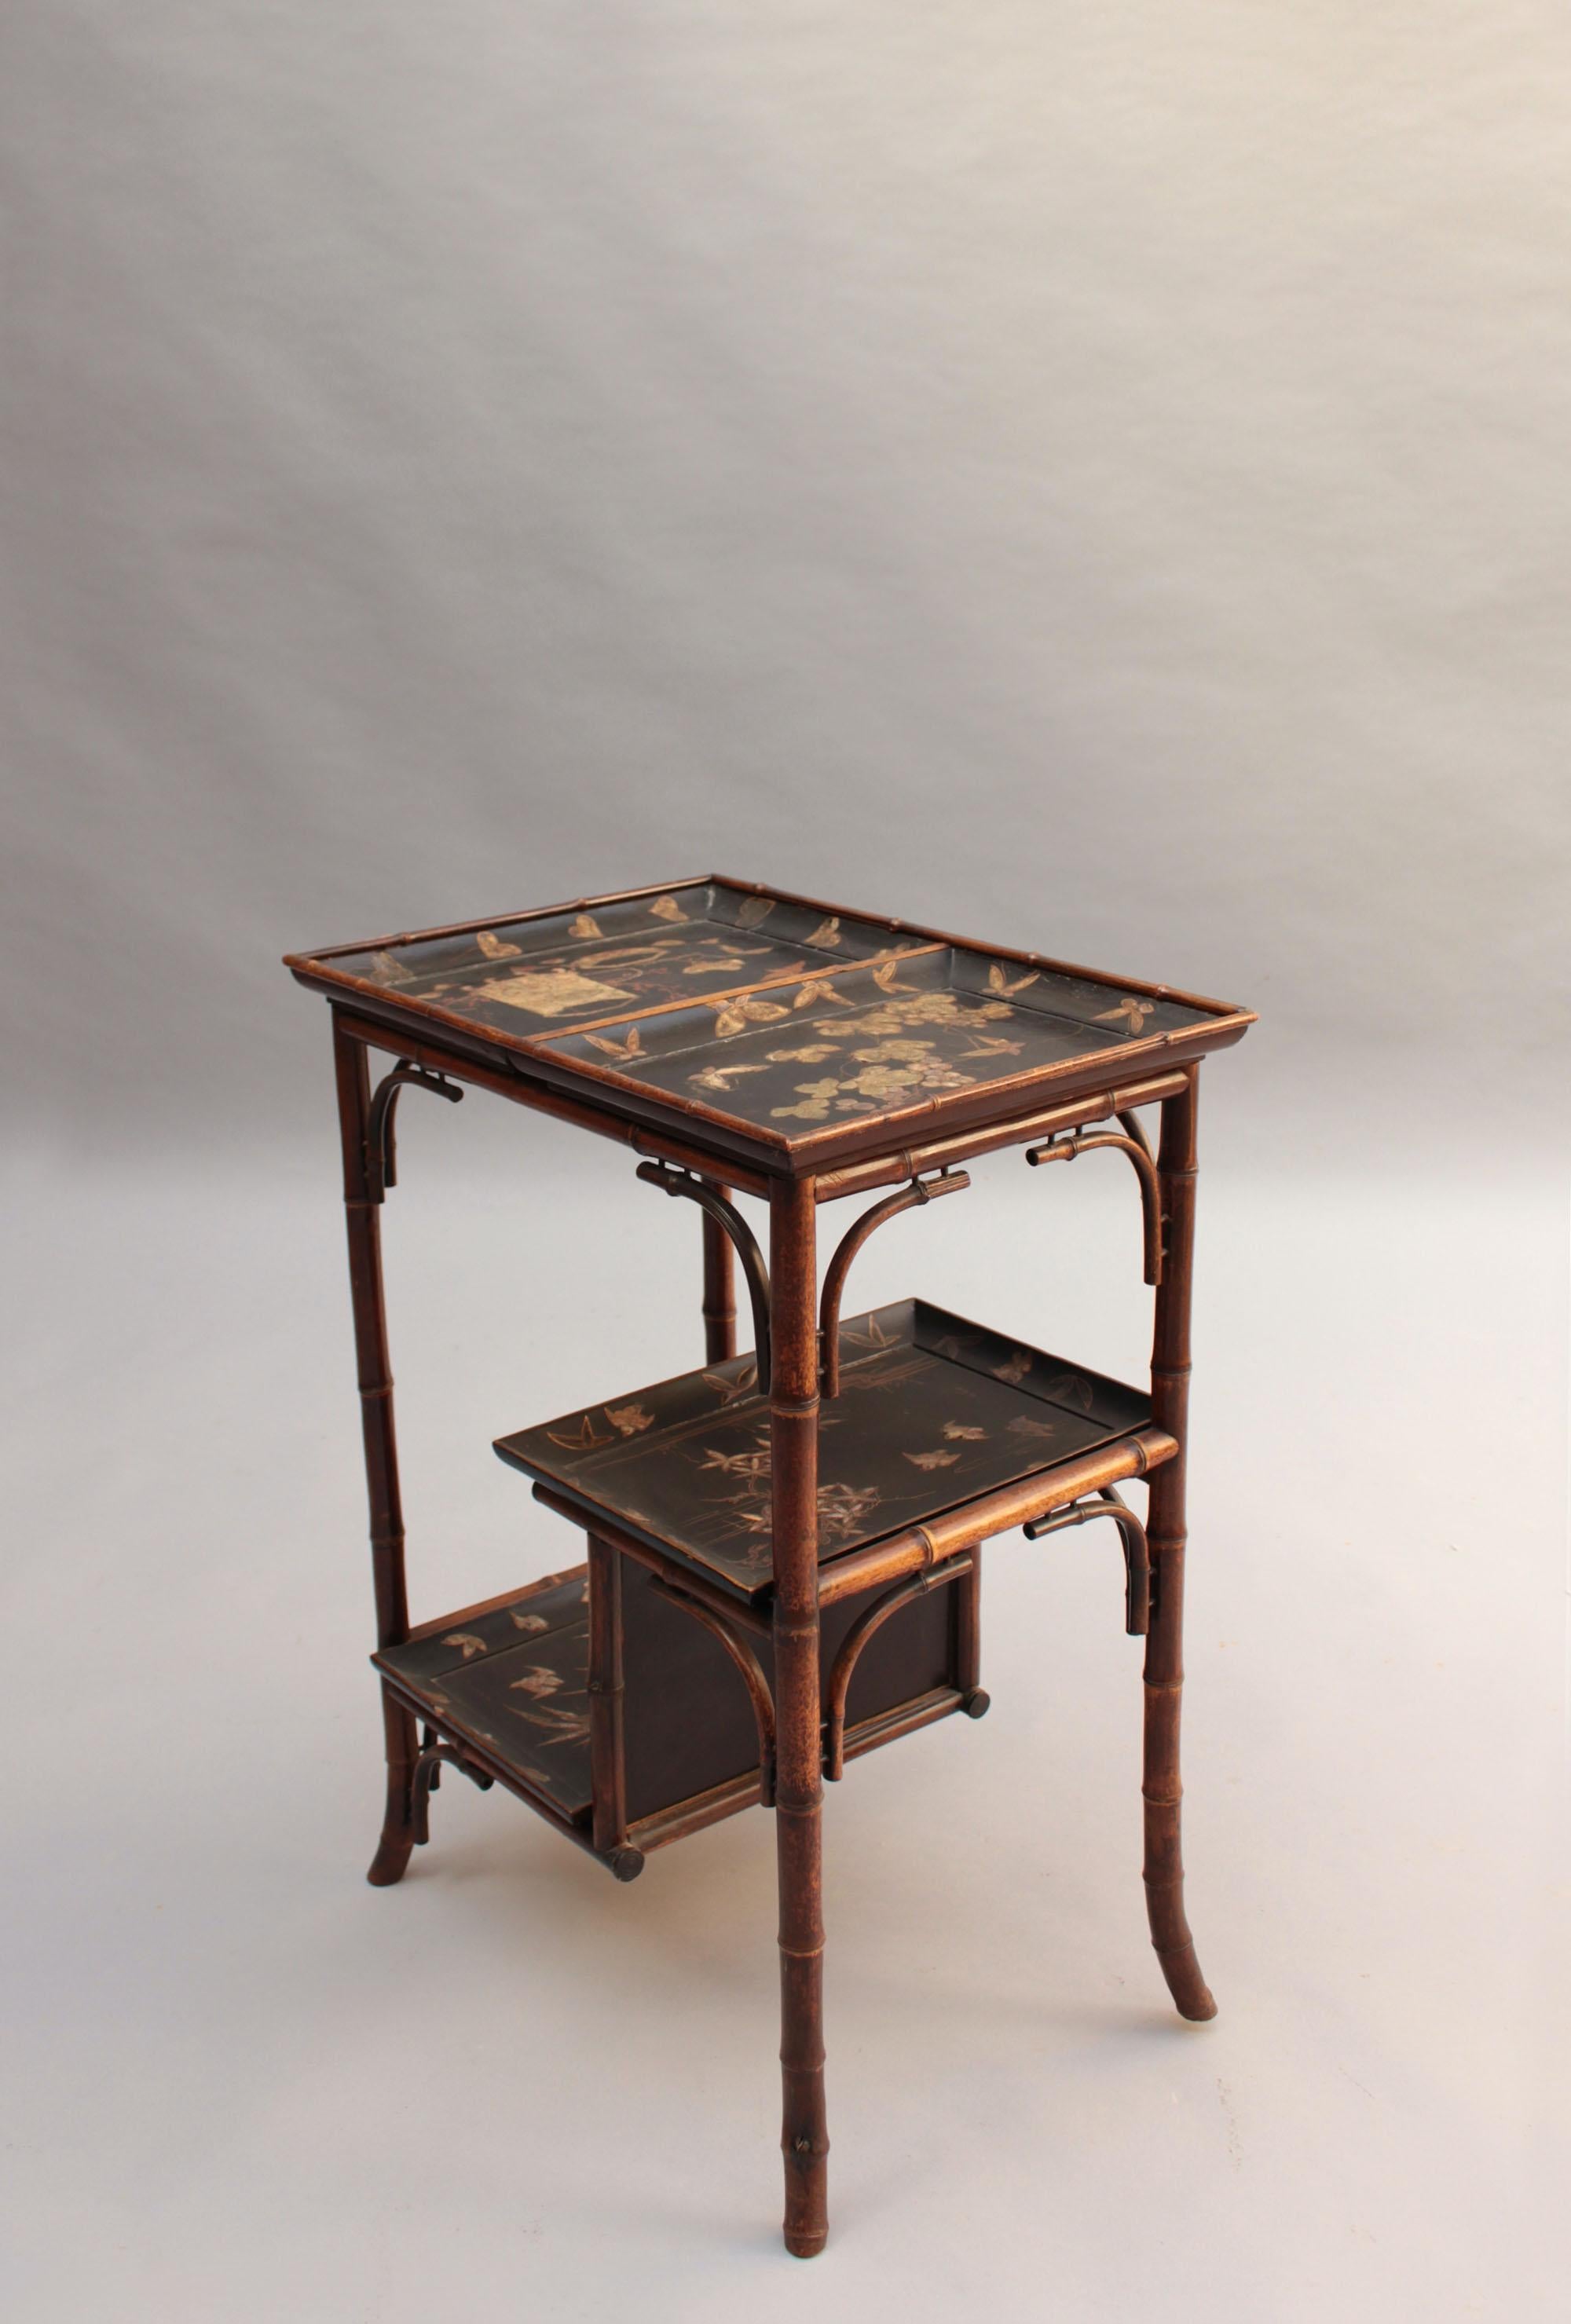 Fine French Japonisme Lacquered Side Table with Shagreen Inlays For Sale 4